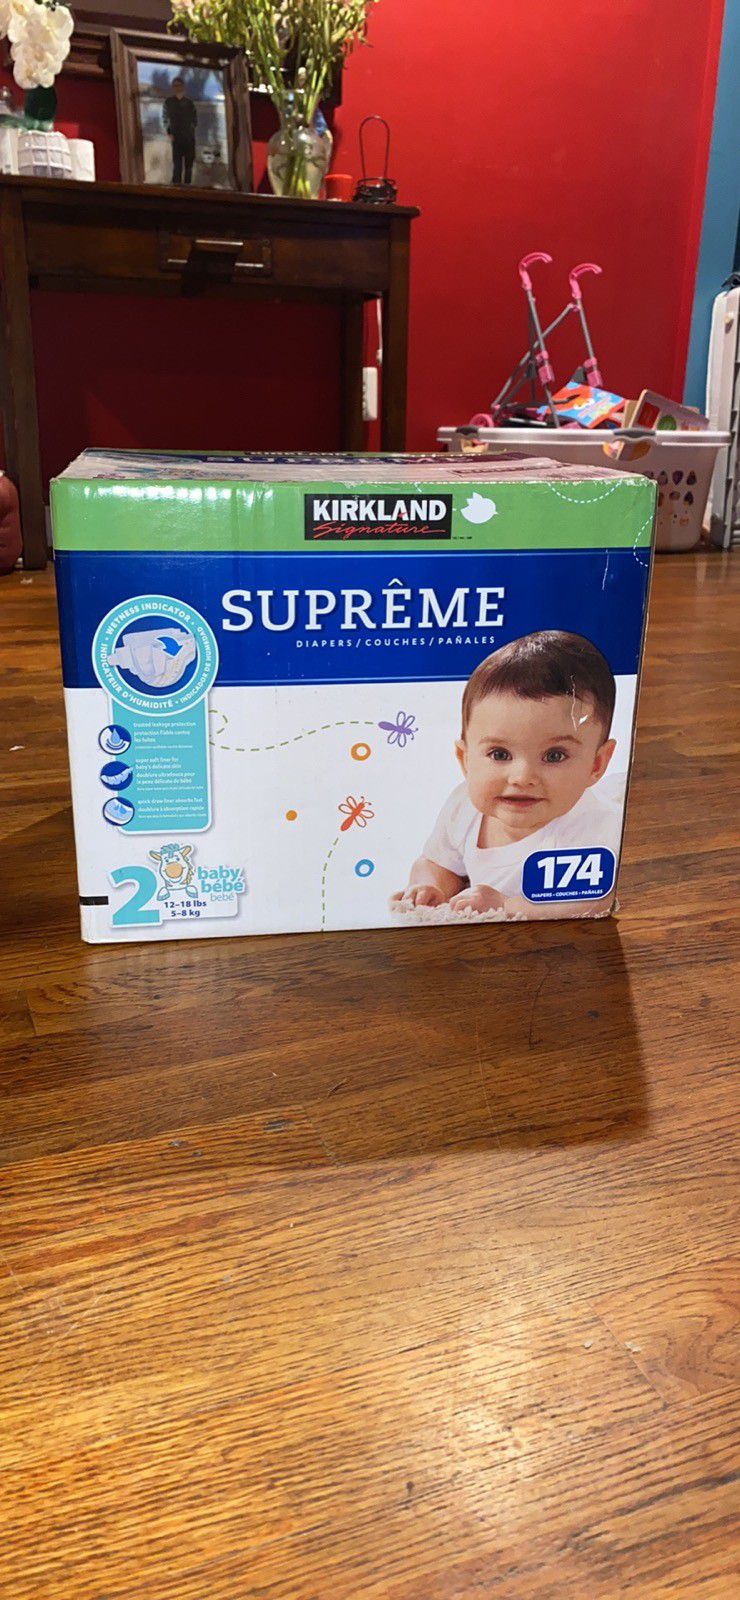 SIZE 2 - 174ct Diapers with wetness indicator - BRAND NEW IN BOX -